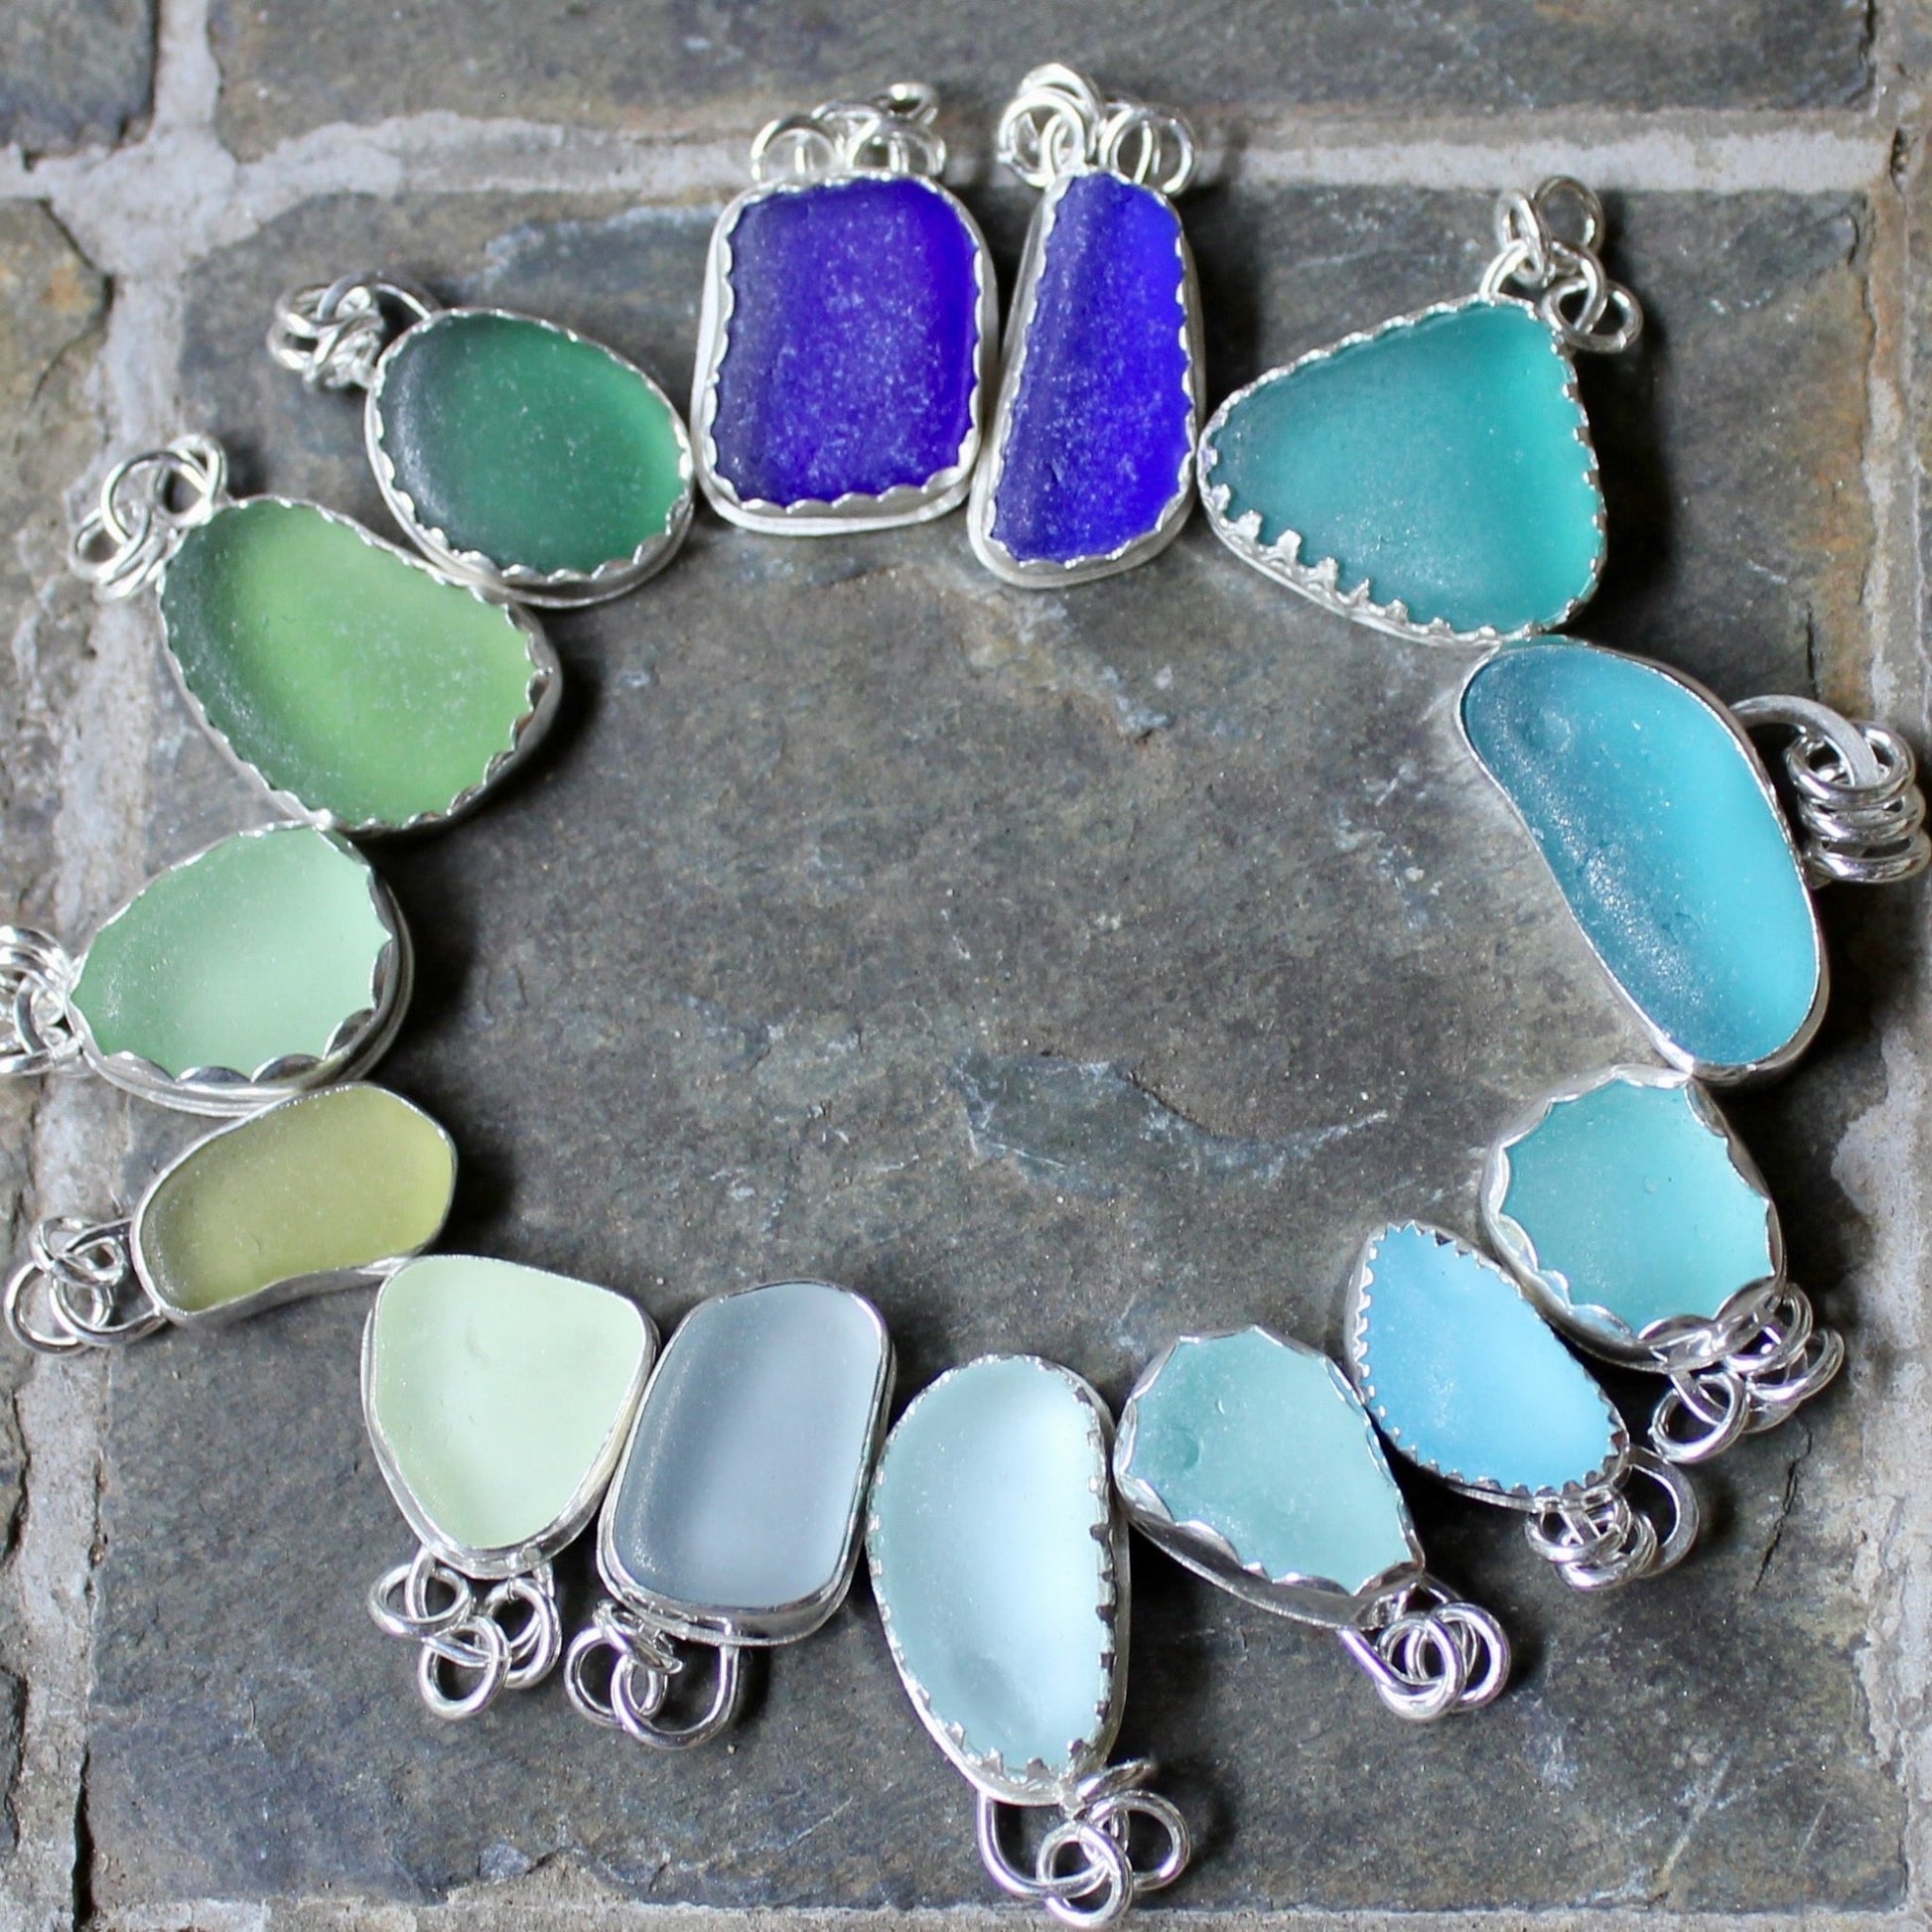 Olive Green Sea Glass Necklace - AccentYourself